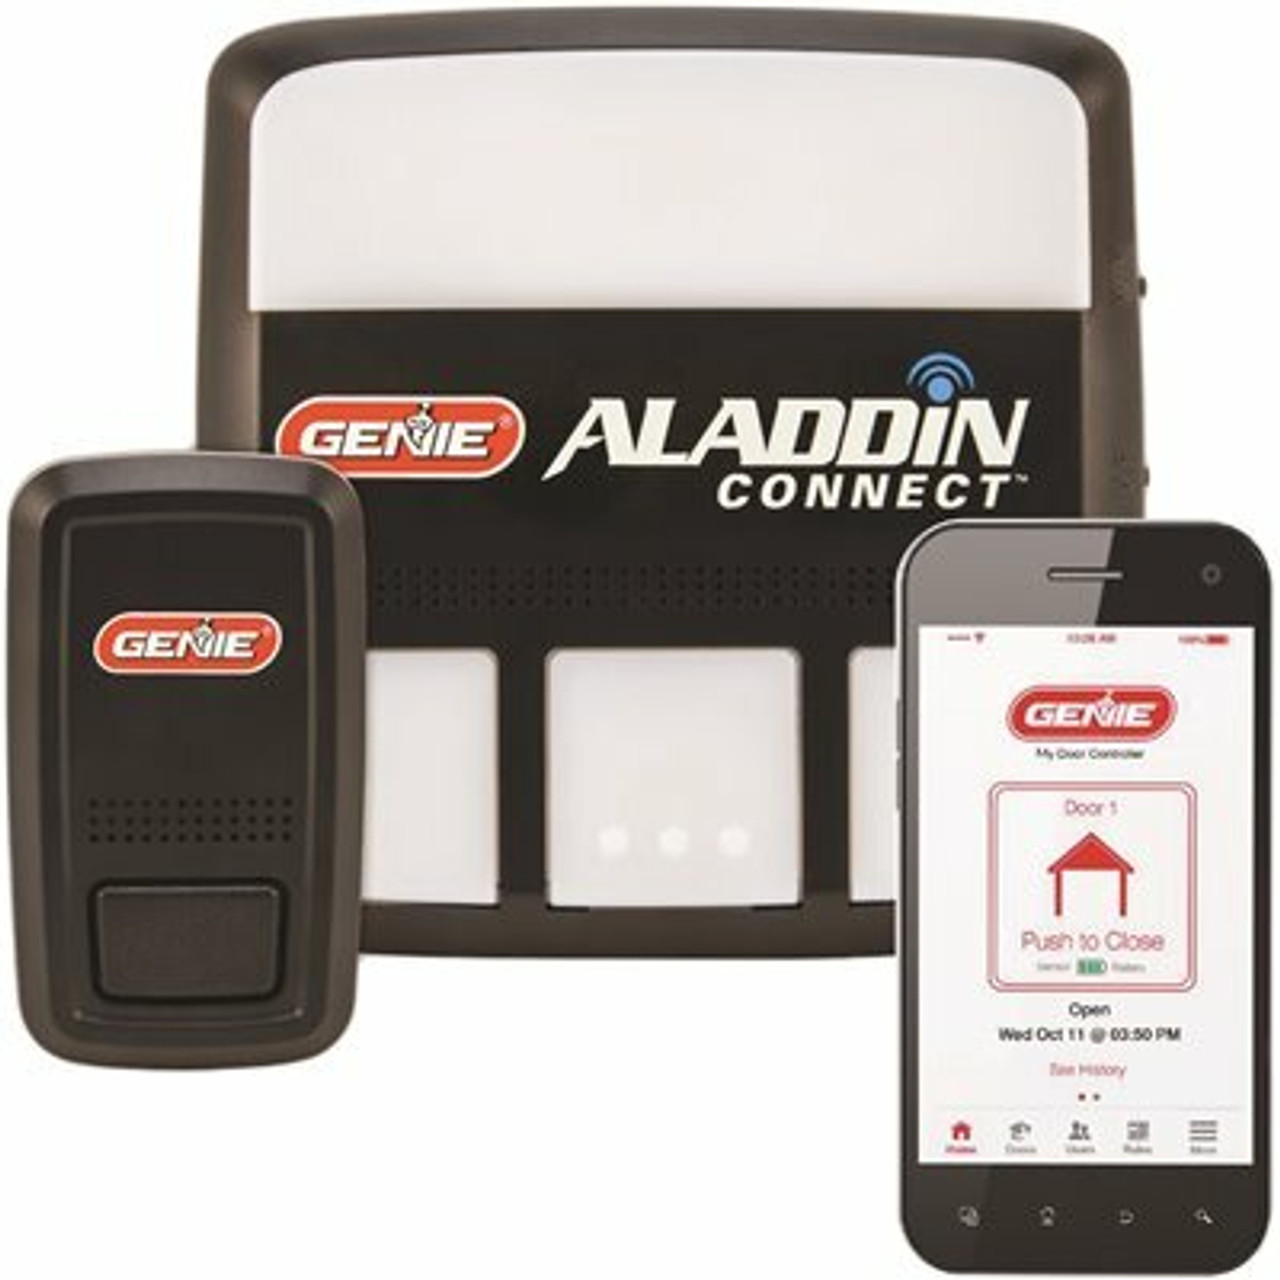 Genie Aladdin Connect Smartphone-Enabled Garage Door Controller To Open And Monitor Your Door From Anywhere